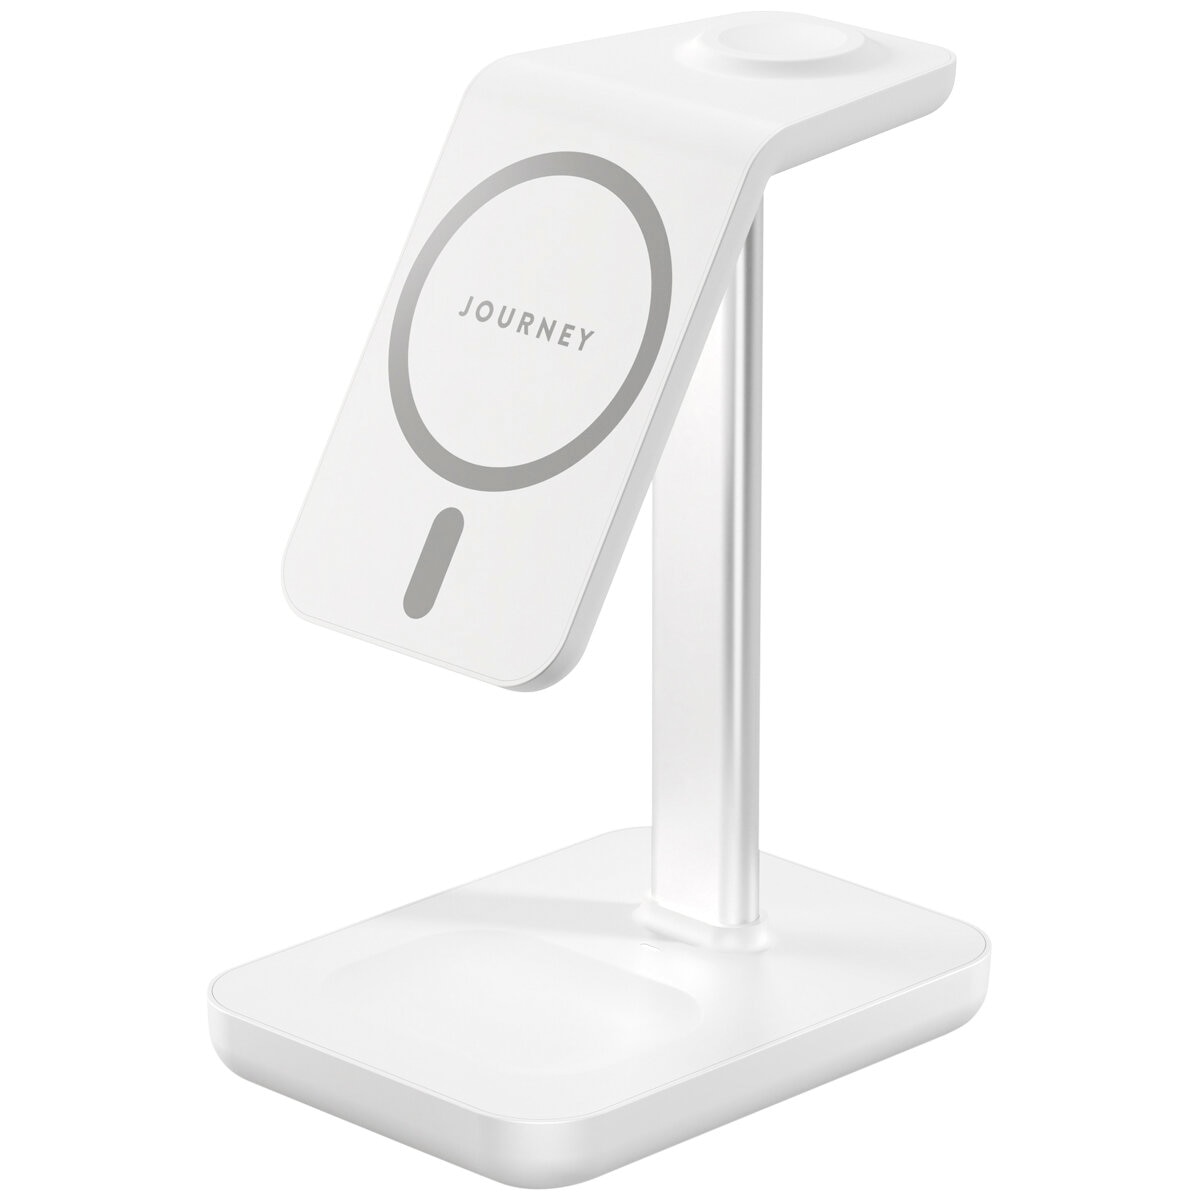 Renewed NFLWireless Charger and Desktop Organizer 